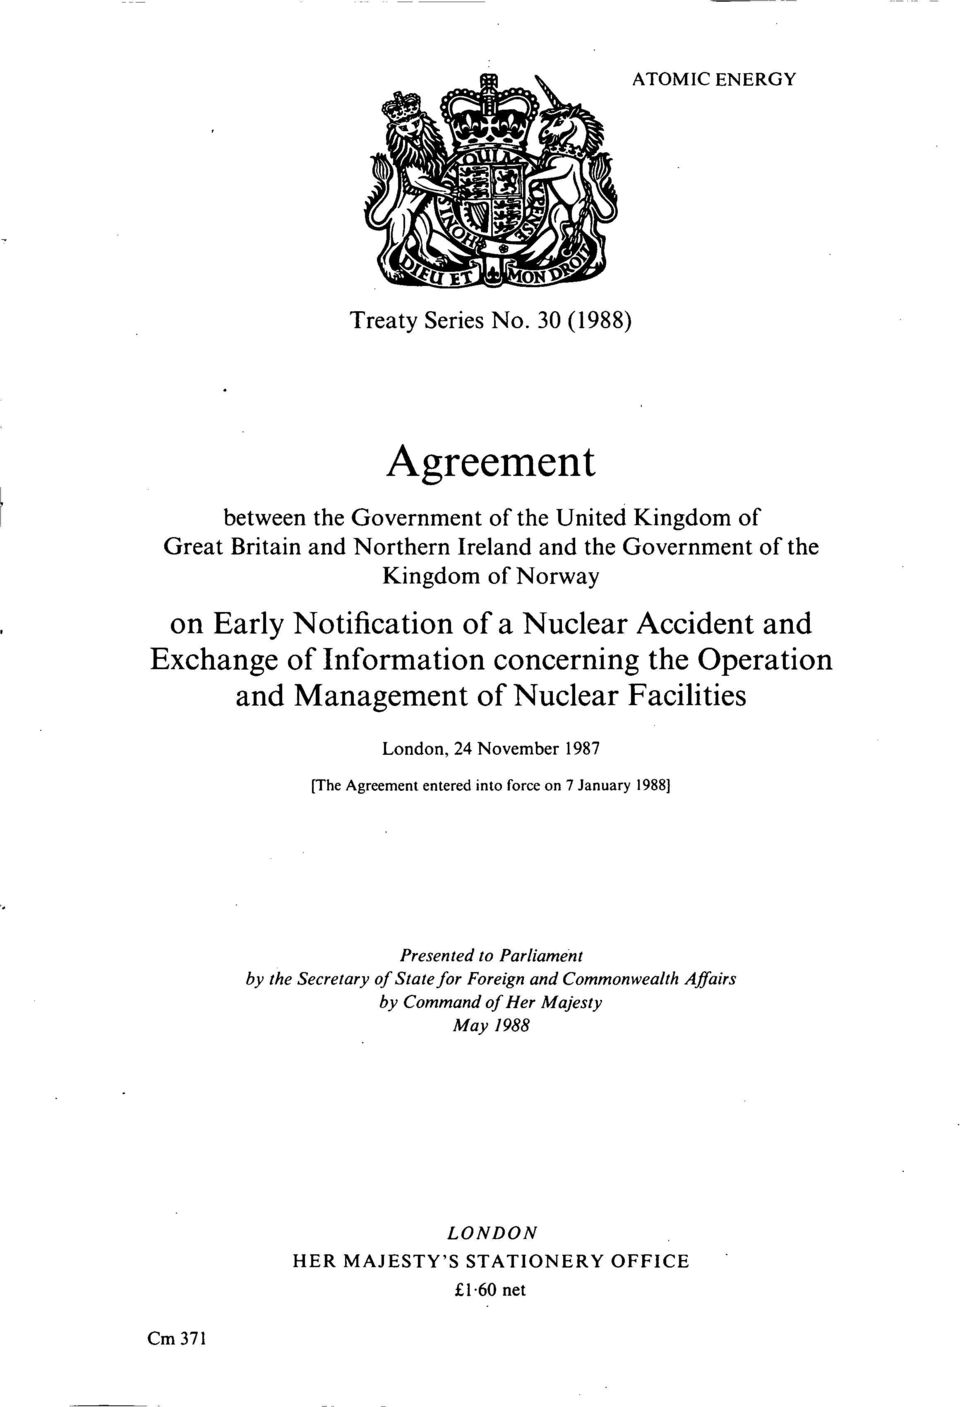 Norway on Early Notification of a Nuclear Accident and Exchange of Information concerning the Operation and Management of Nuclear Facilities